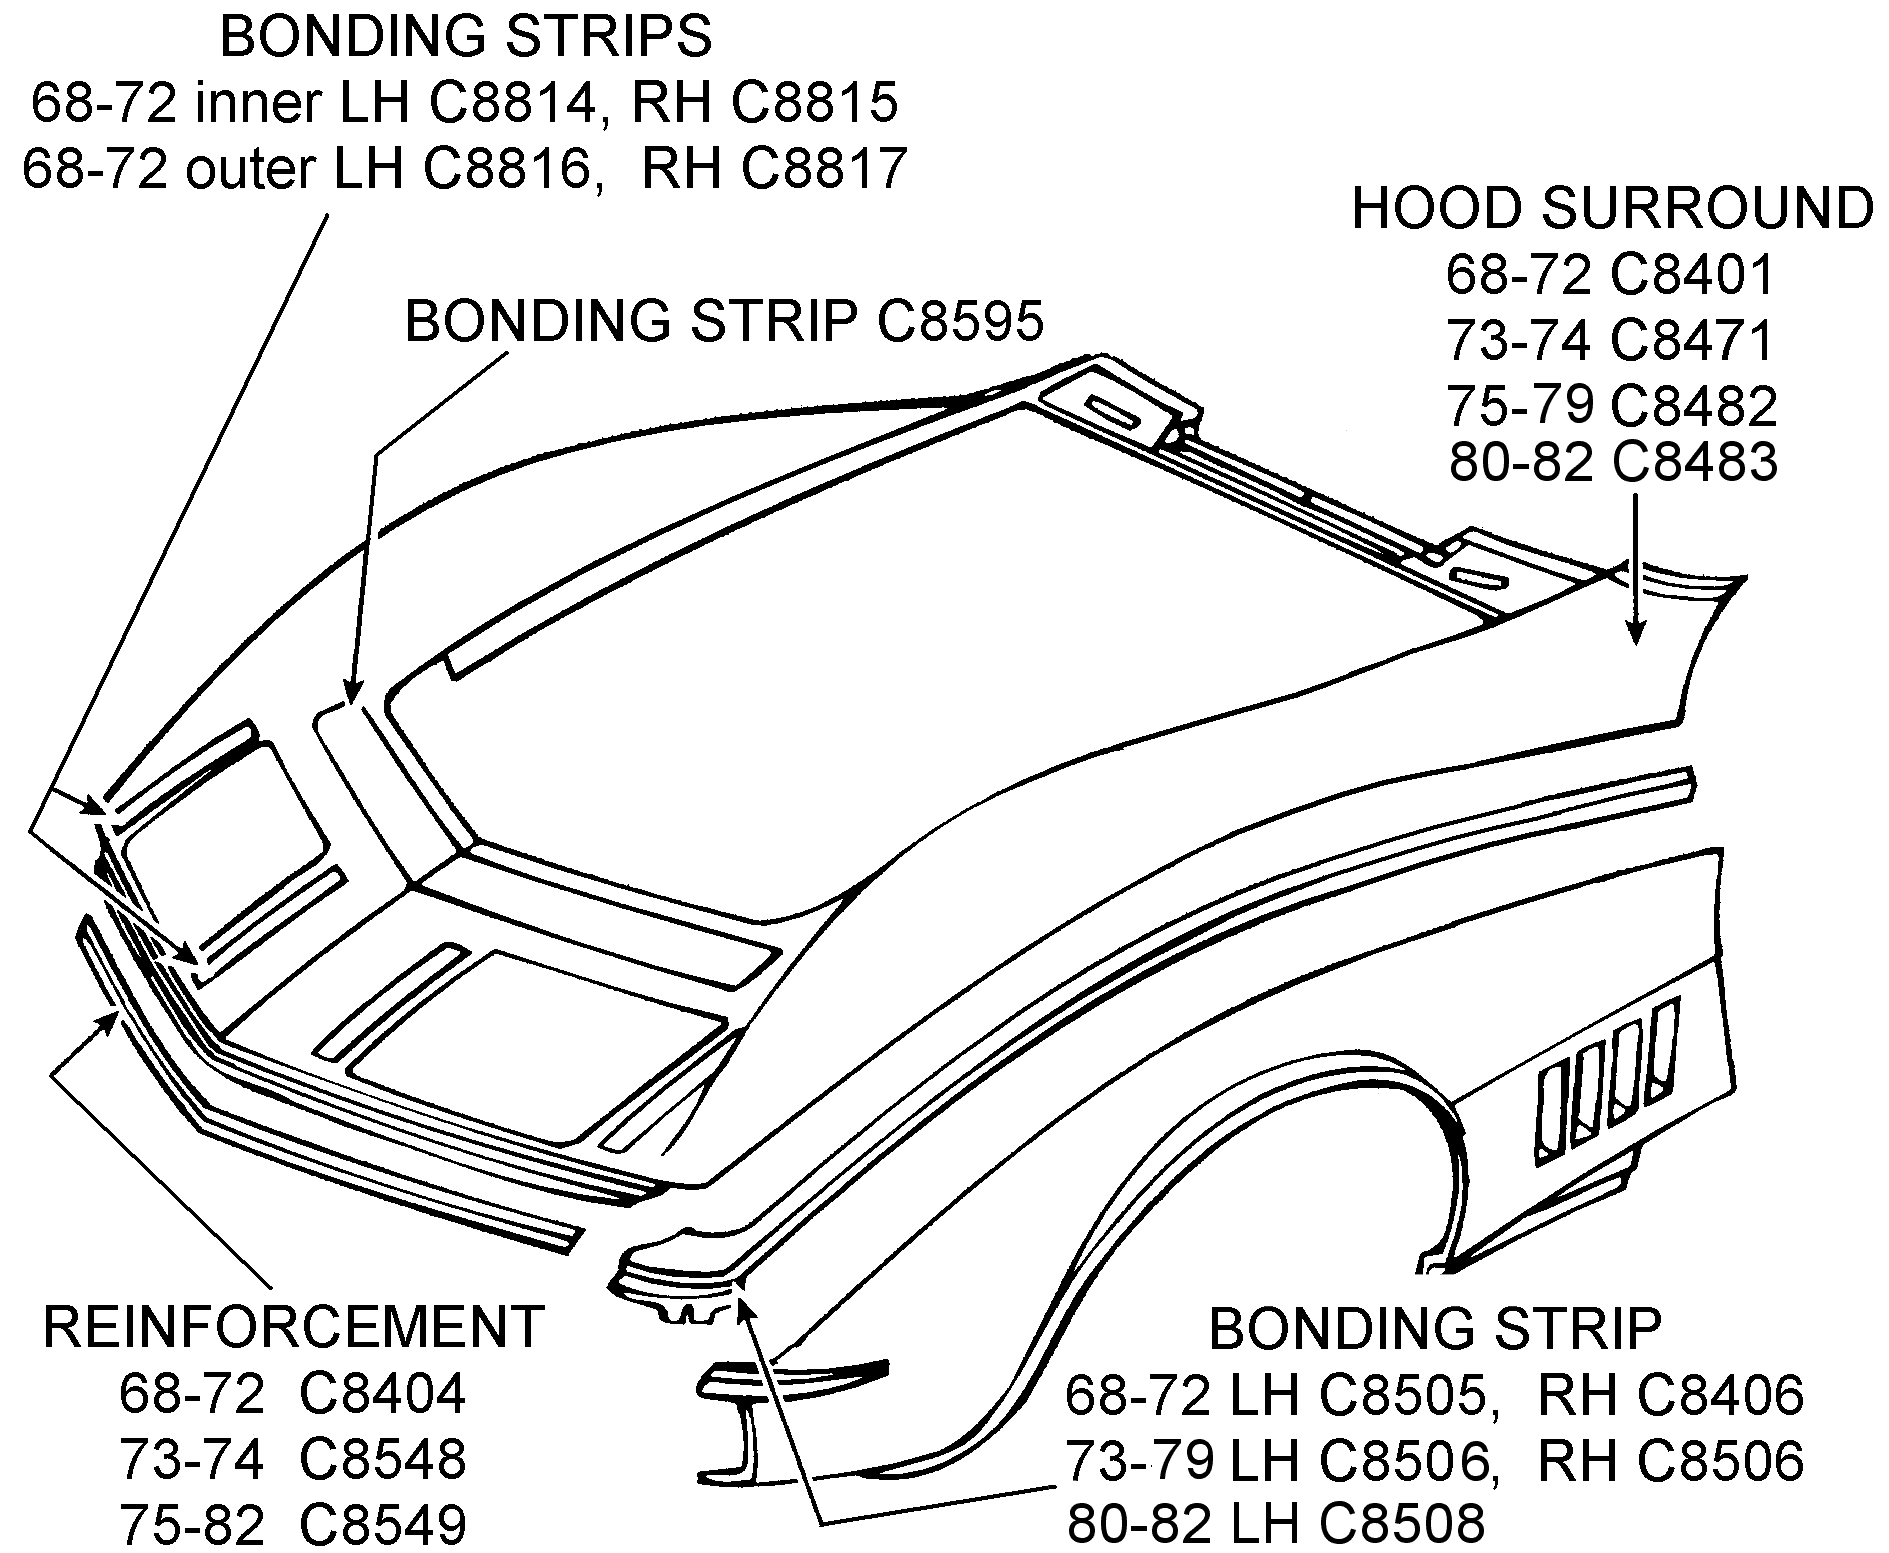 Hood Surround And Related - Diagram View